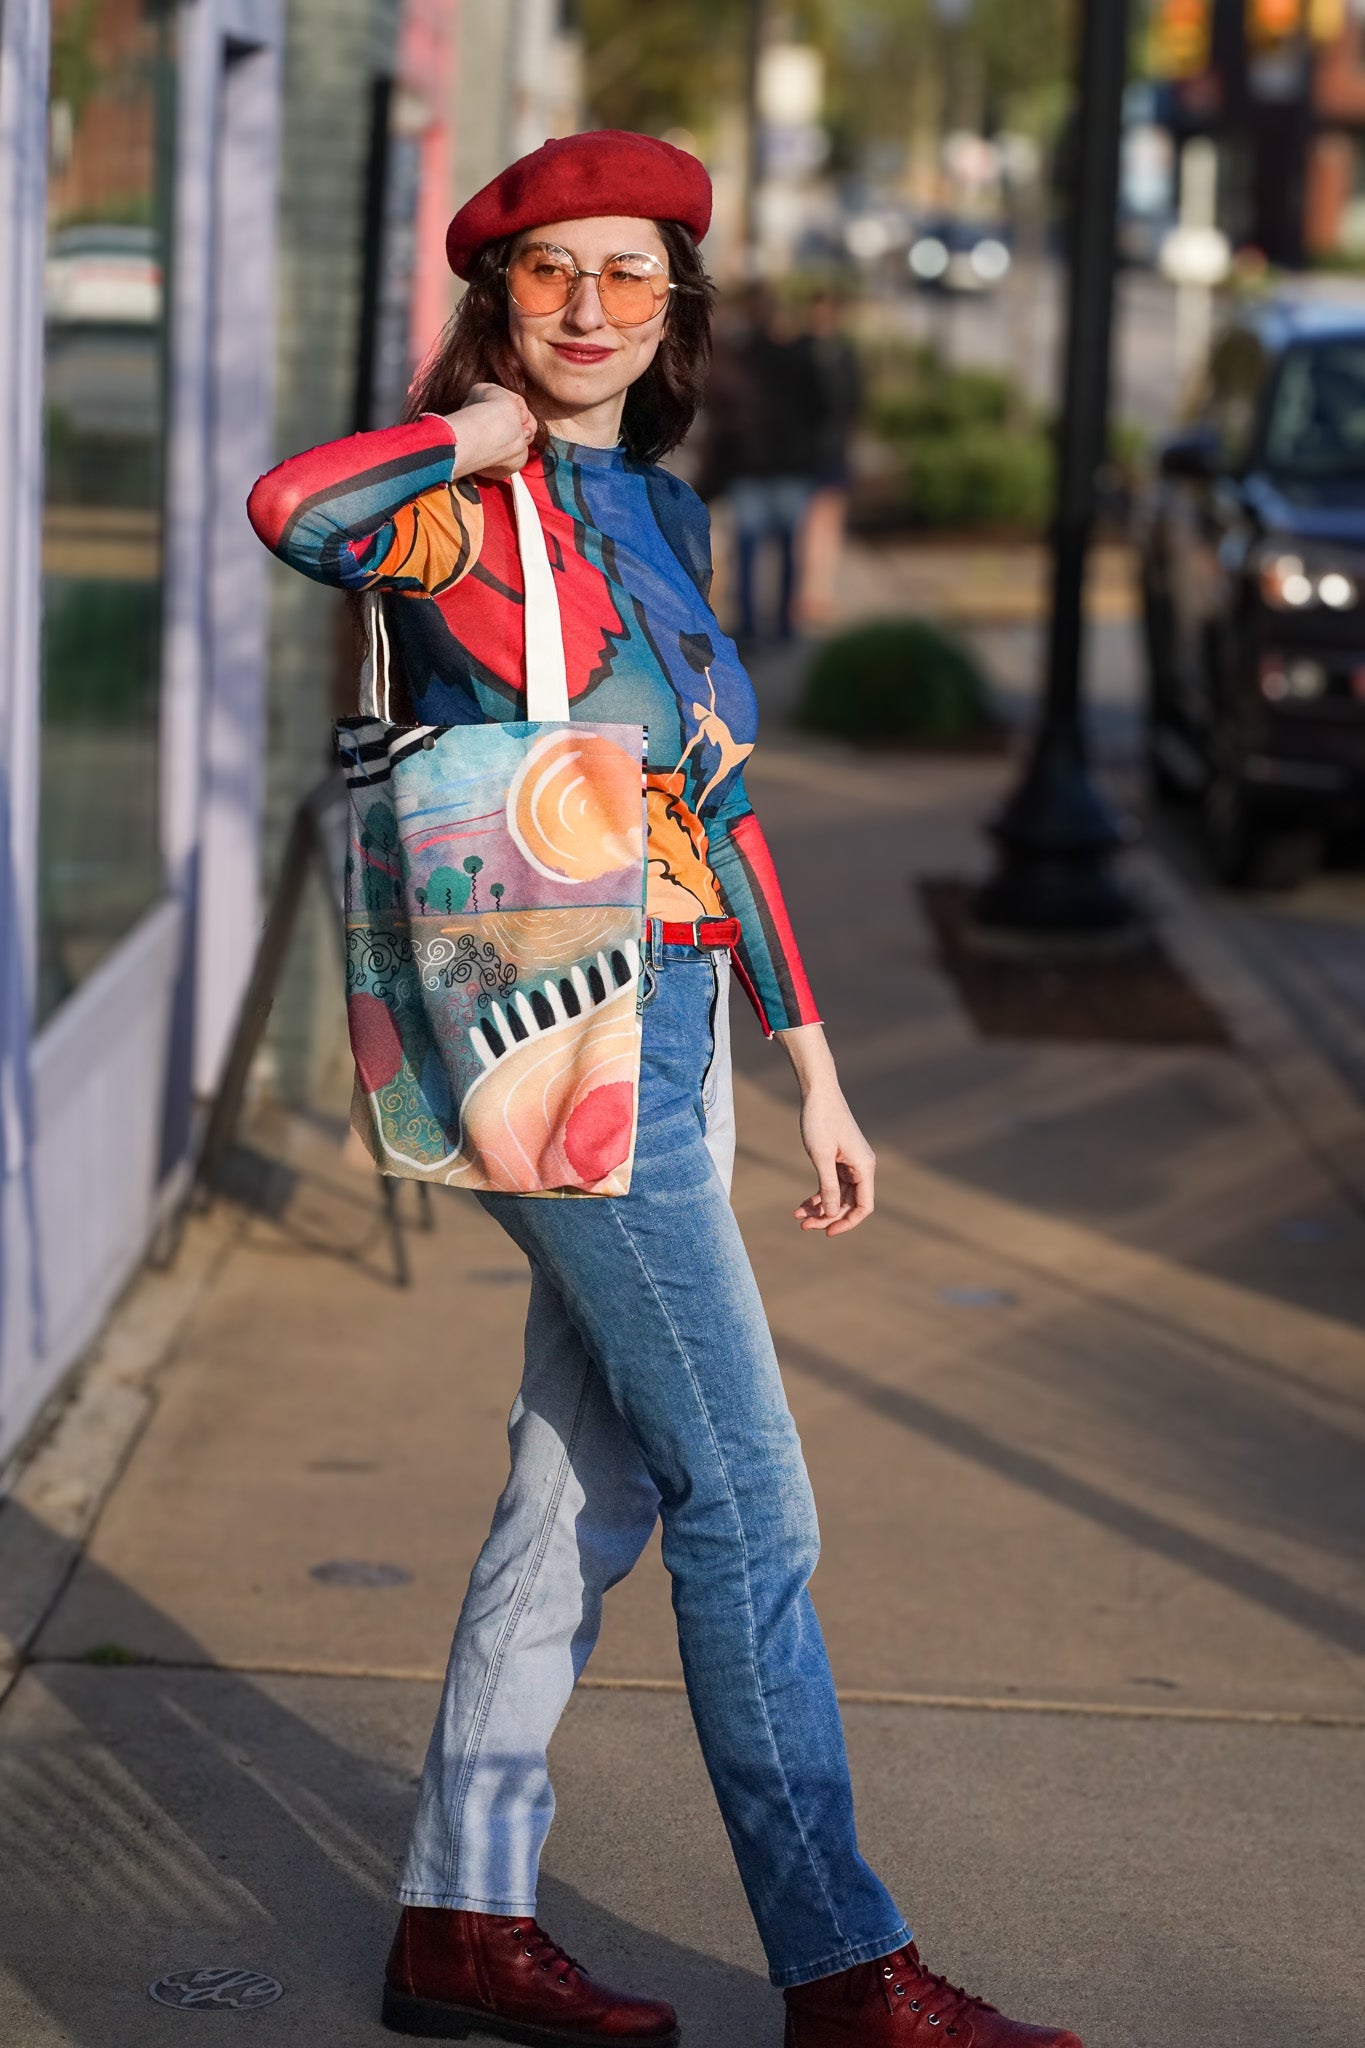 "Summer Serendipity" Tote Bag | Bags | All Around Artsy Fashion